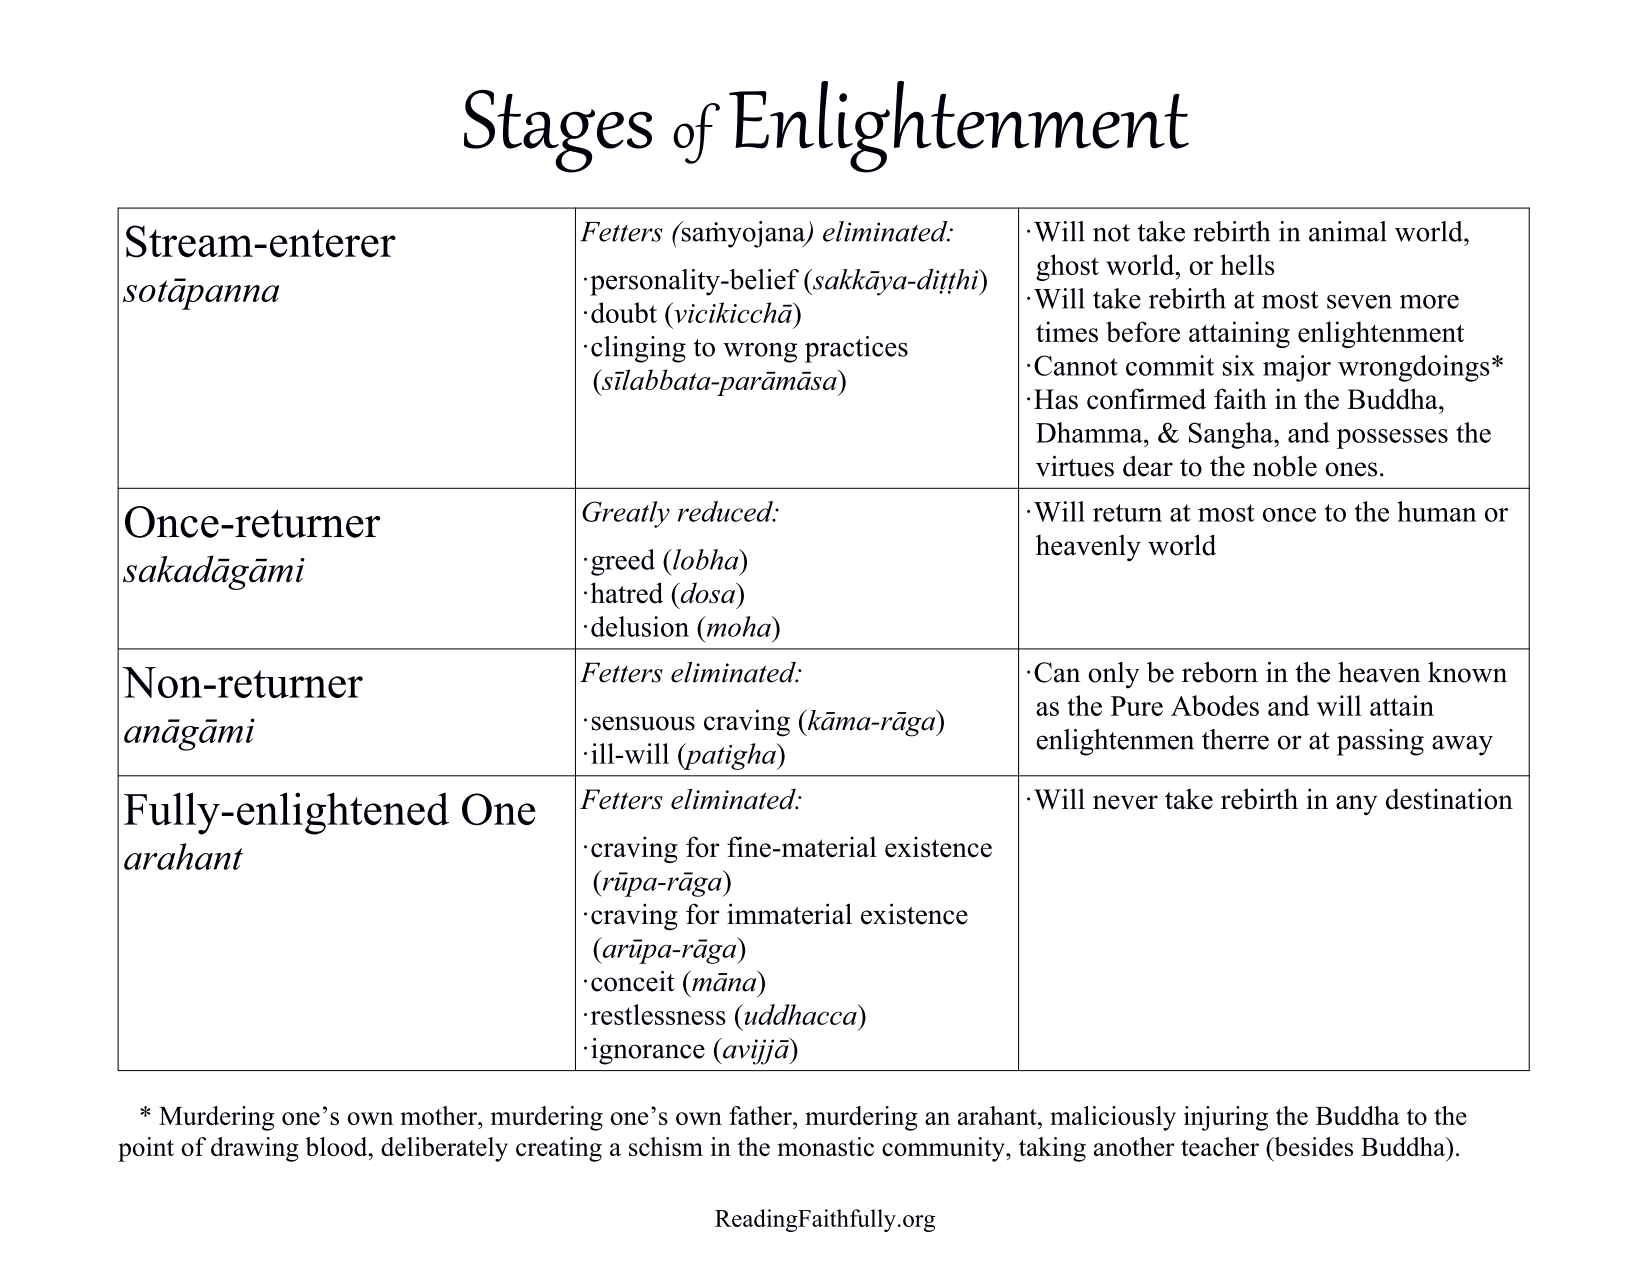 Stages of Enlightenment Handout Reading Faithfully